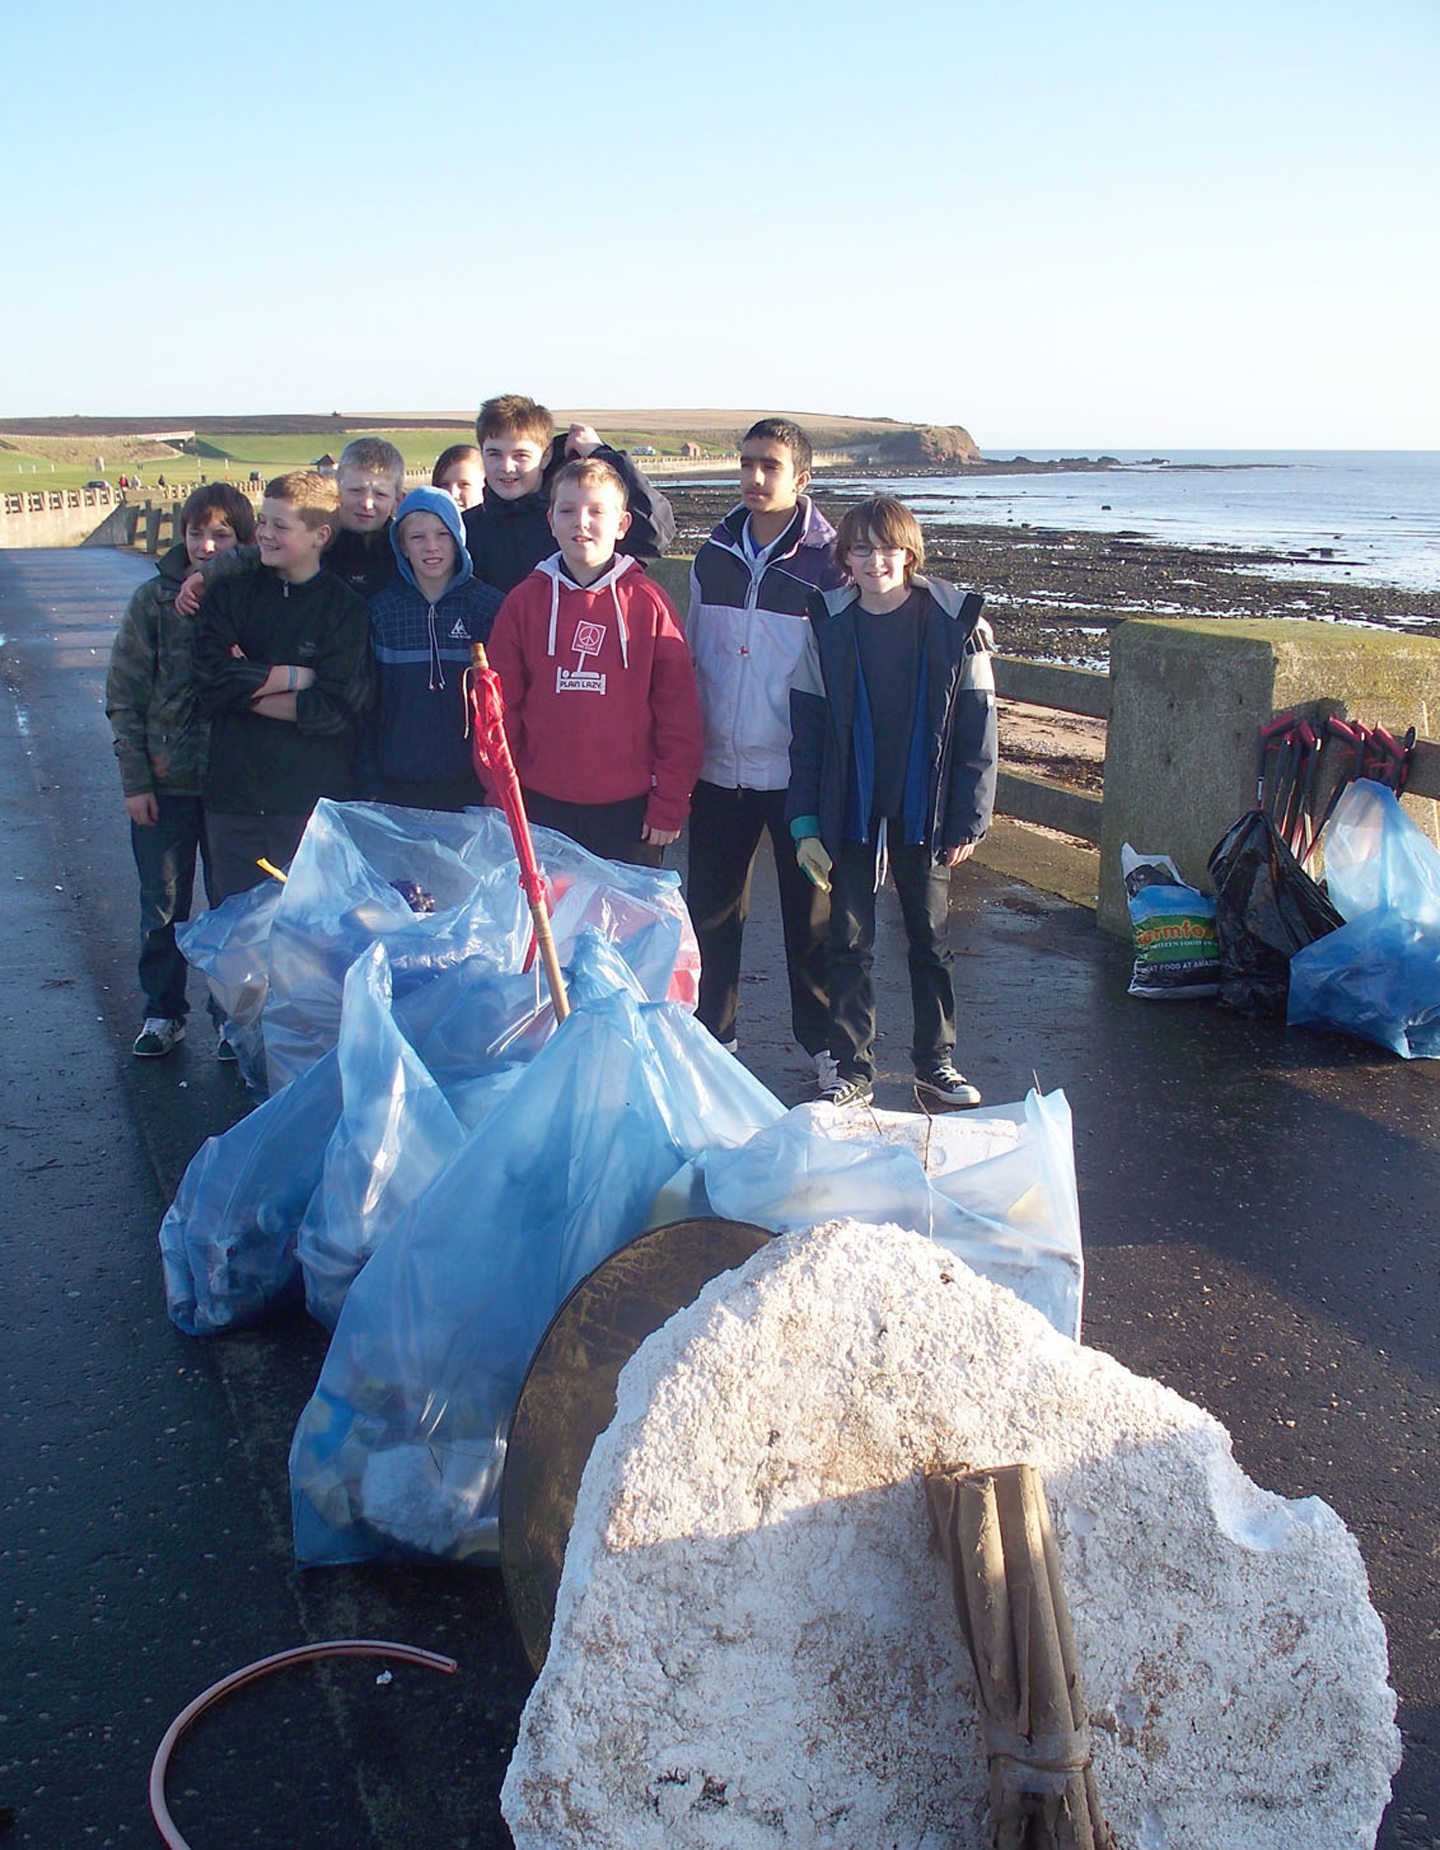 Pupils with bags of rubbish tidying up at Victoria Park, with the coastline in the background